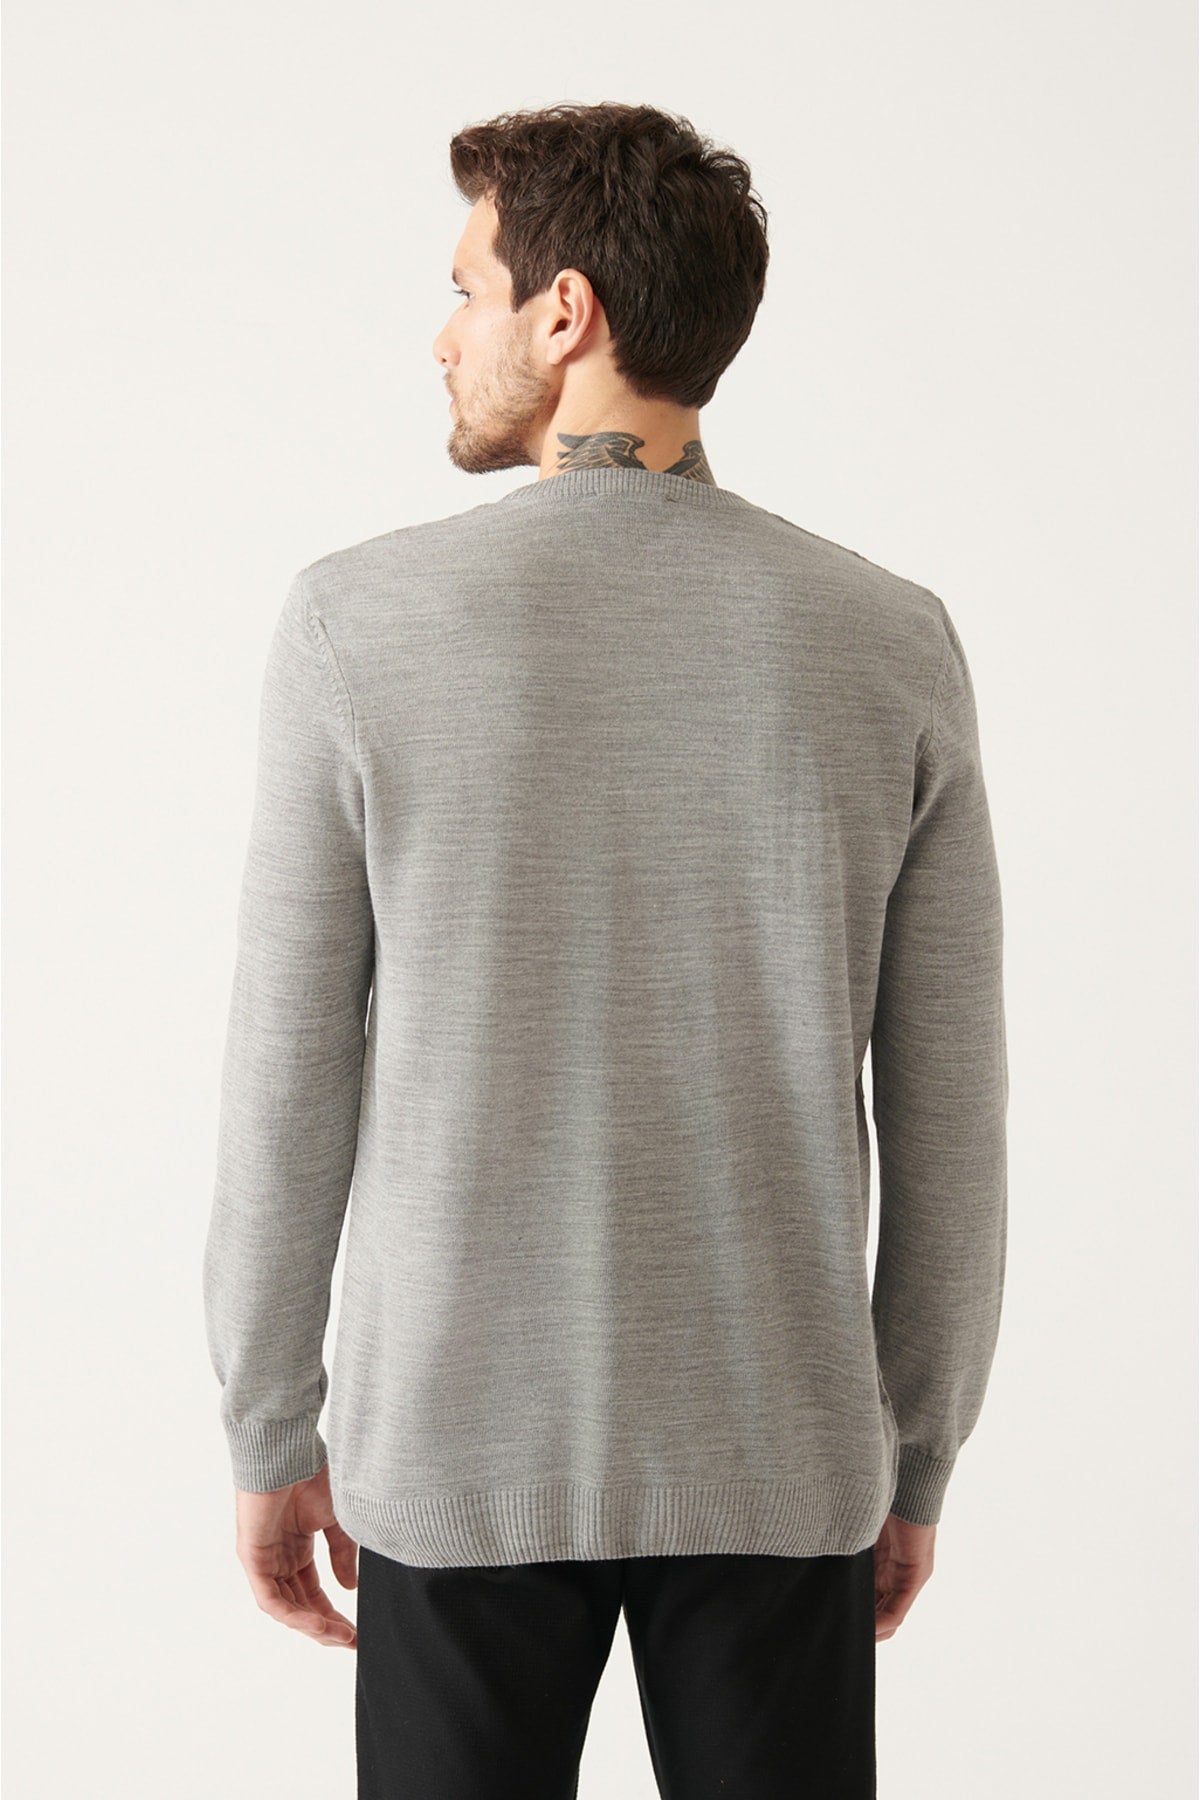 Men's gray bicycle collar front textured regular fit knitwear sweater a22y5072